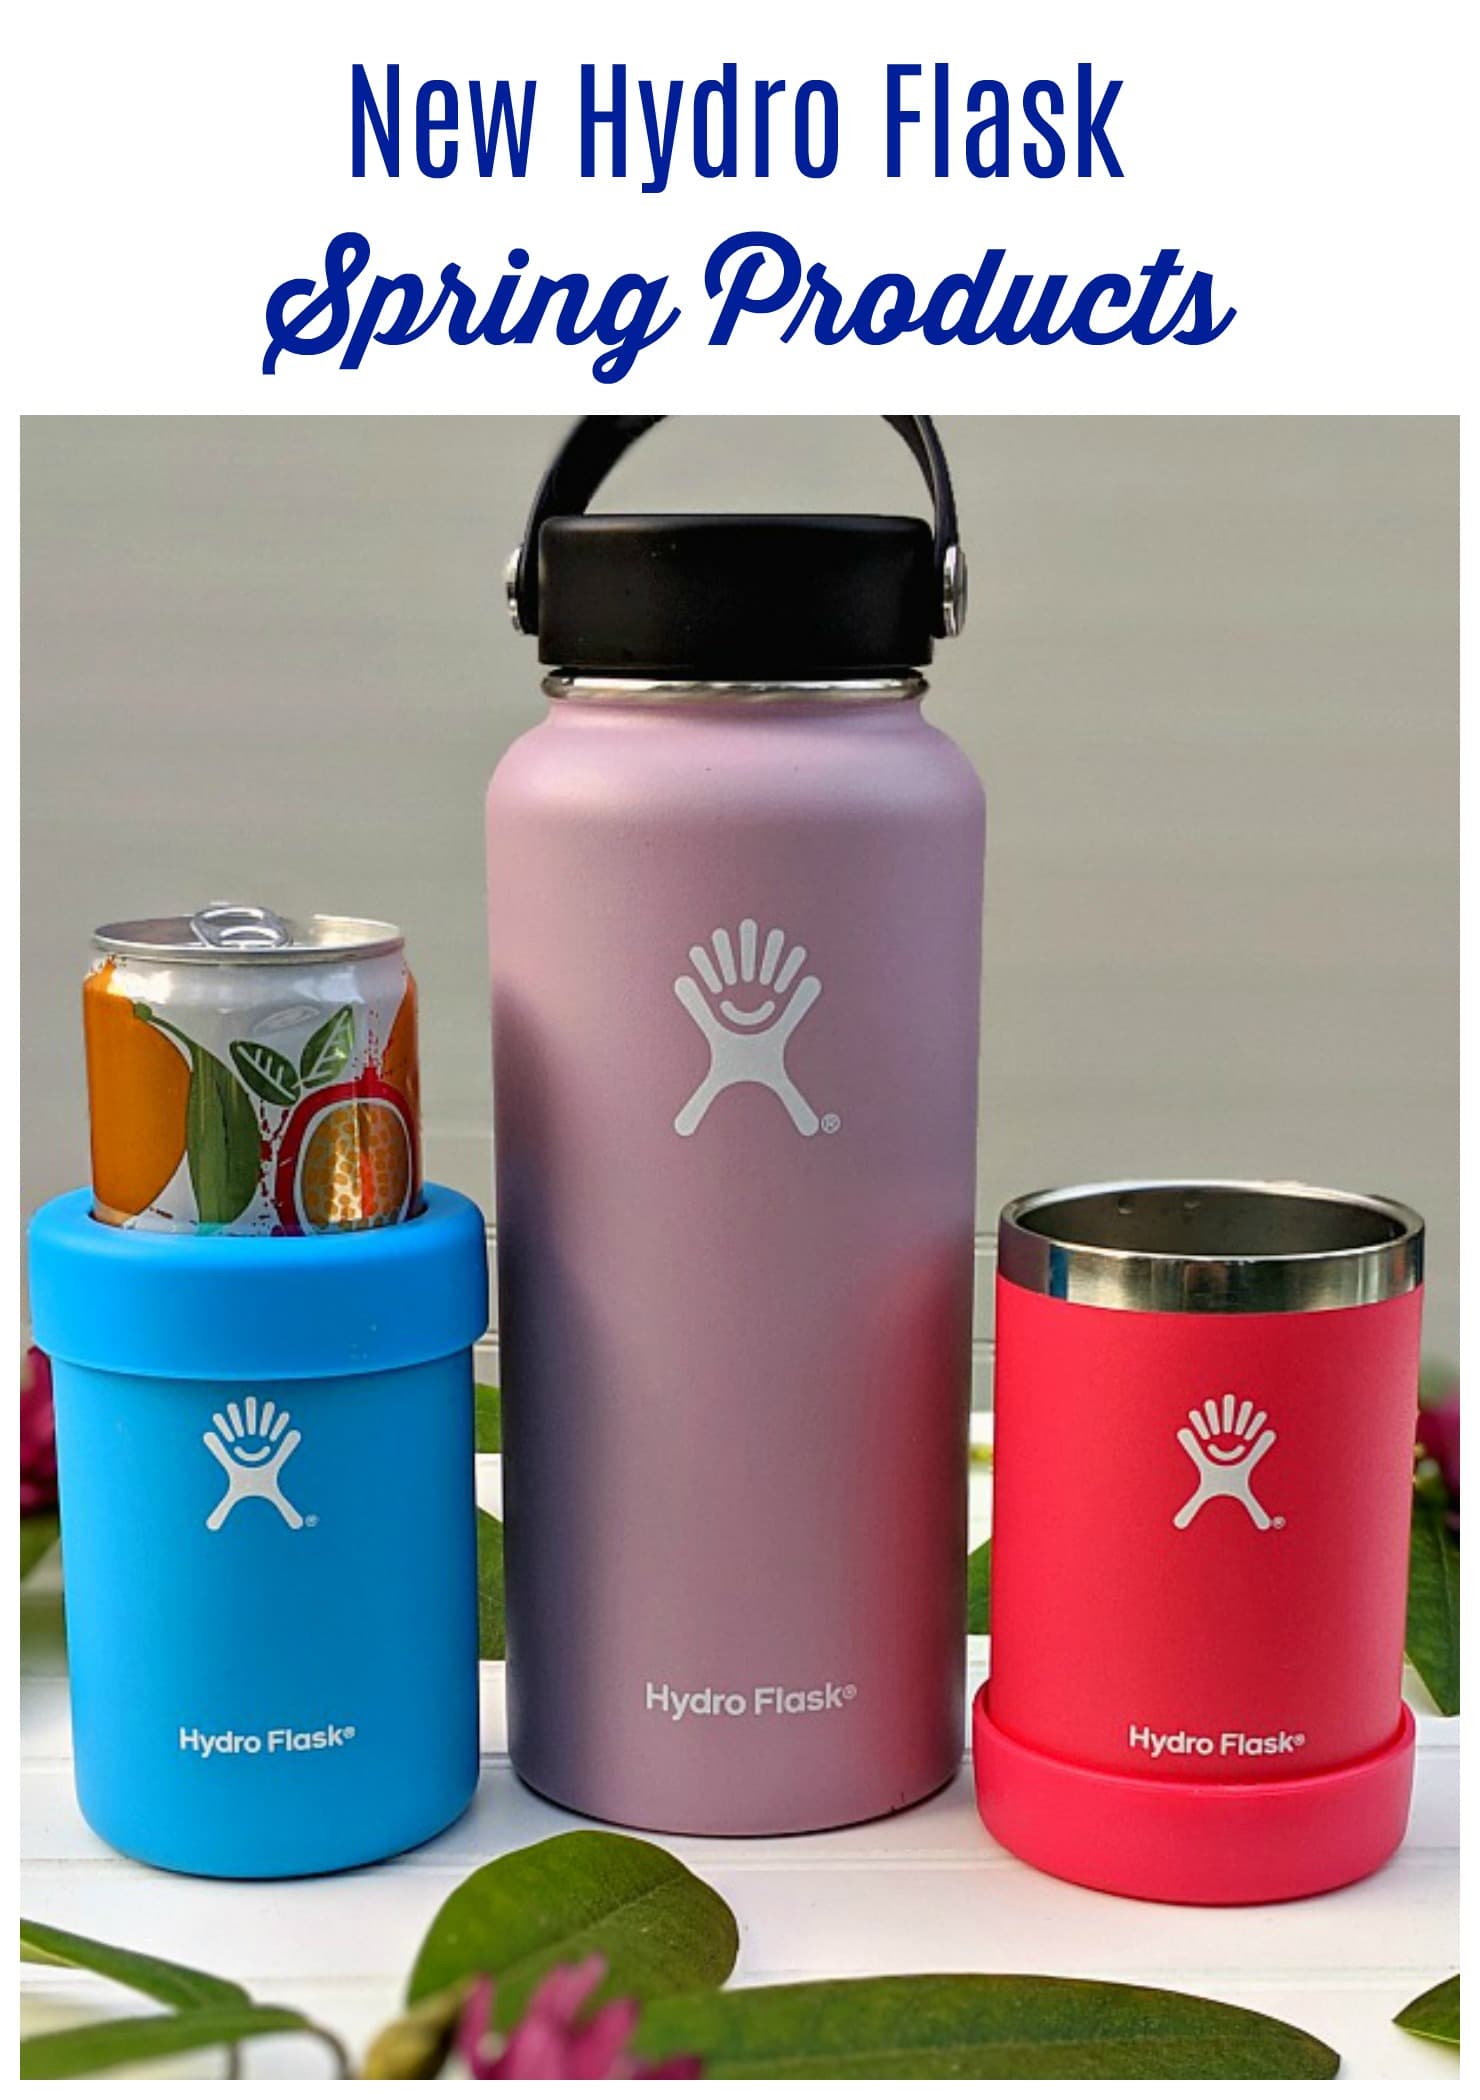 https://www.thriftynorthwestmom.com/wp-content/uploads/2019/03/Hydro-Flask-Spring-Products-1.jpg